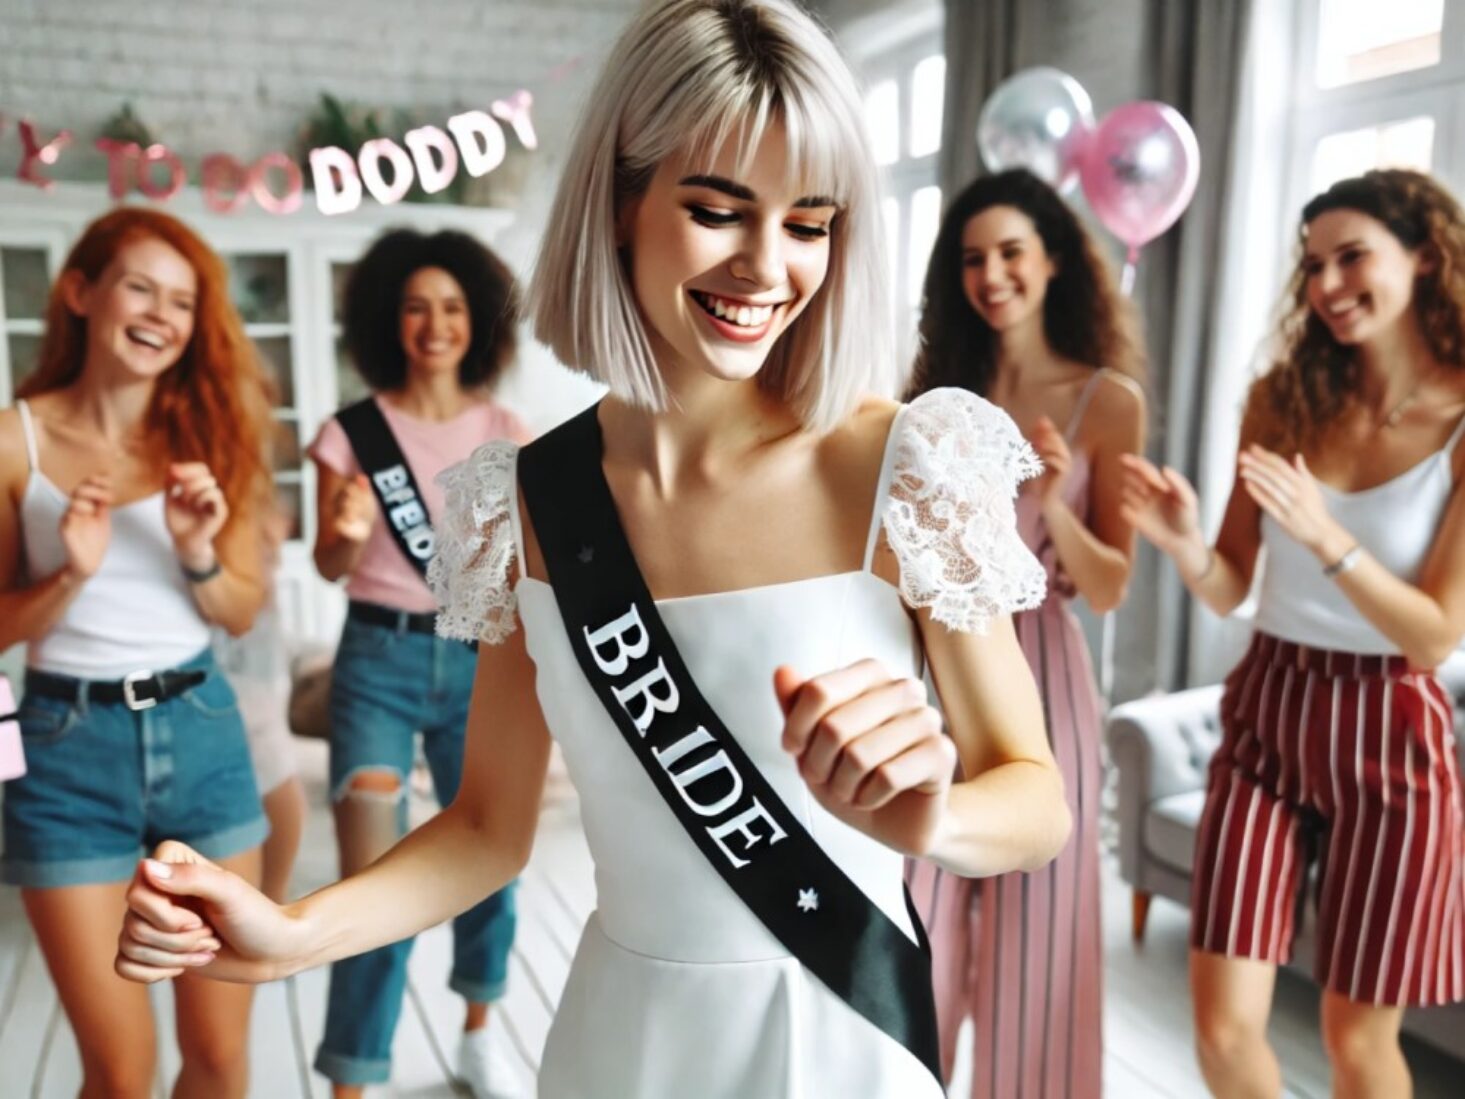 The Best Entertainment Ideas for Hen Dos